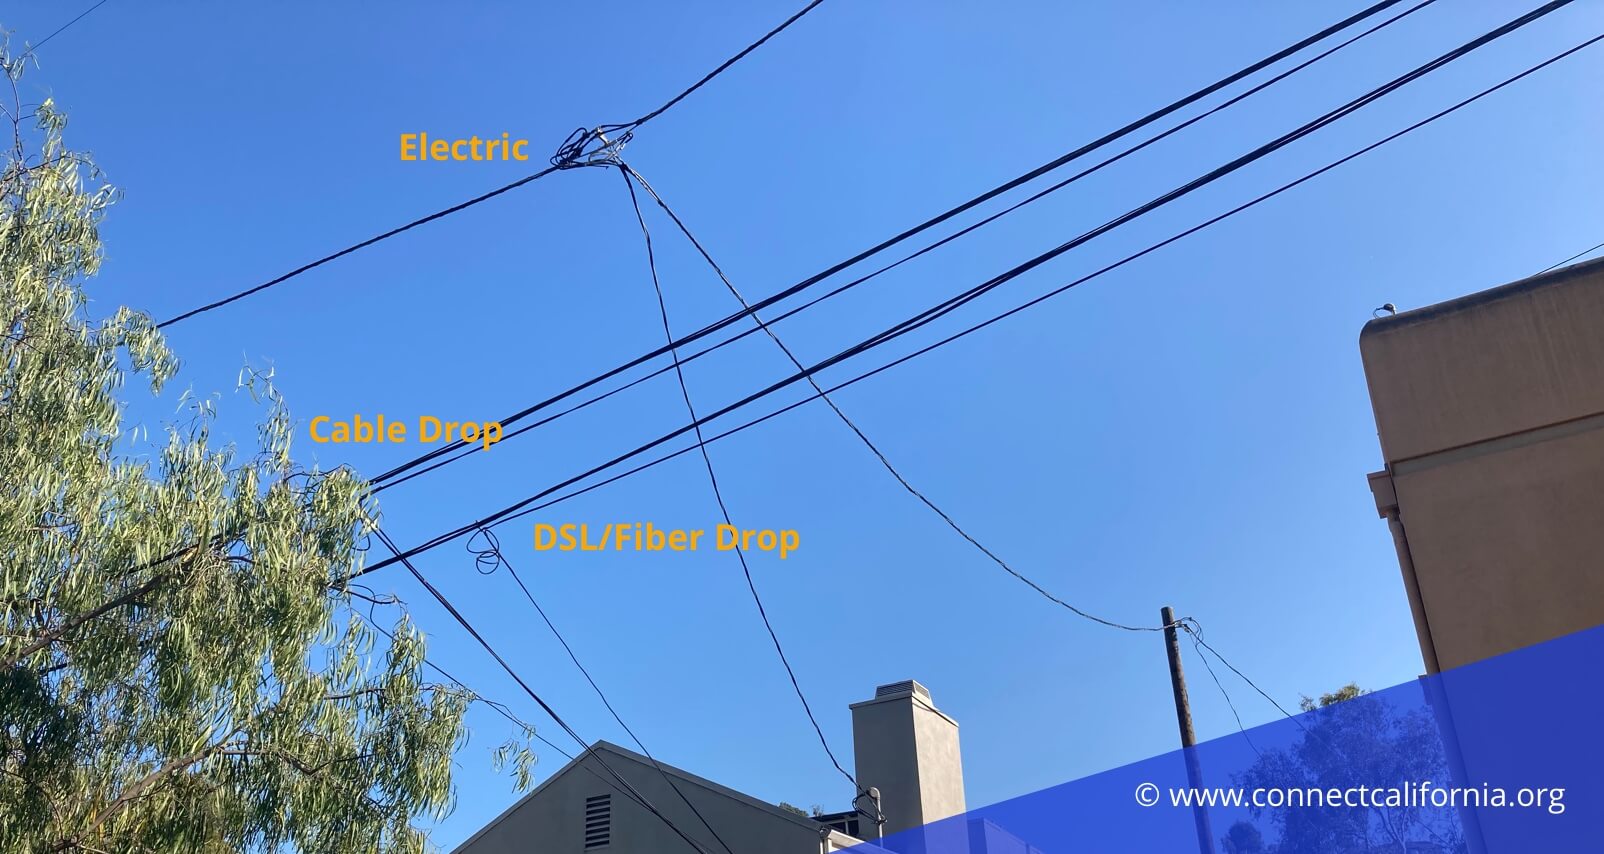 Example of cable drop on house.